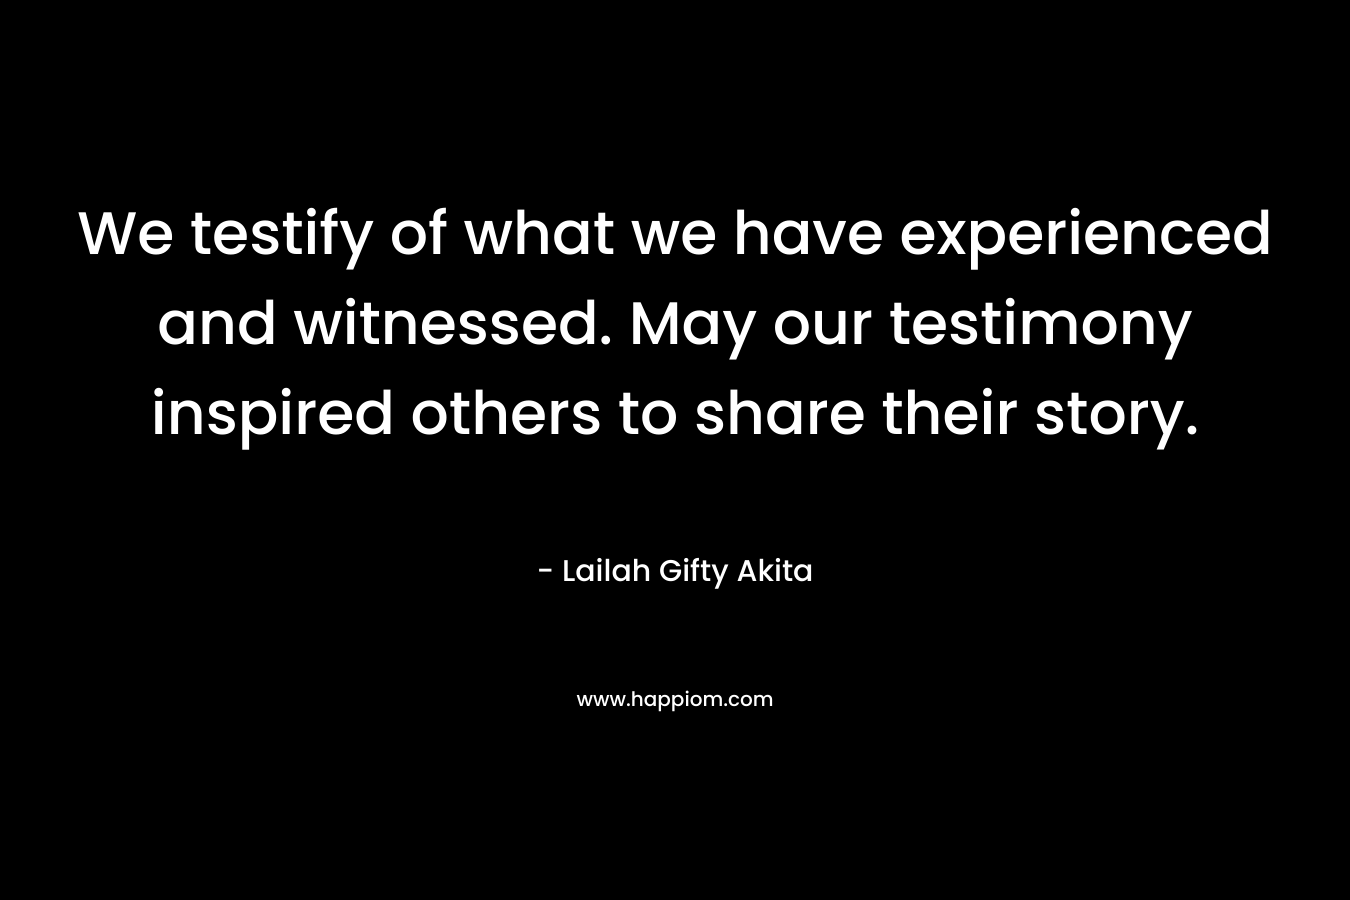 We testify of what we have experienced and witnessed. May our testimony inspired others to share their story.